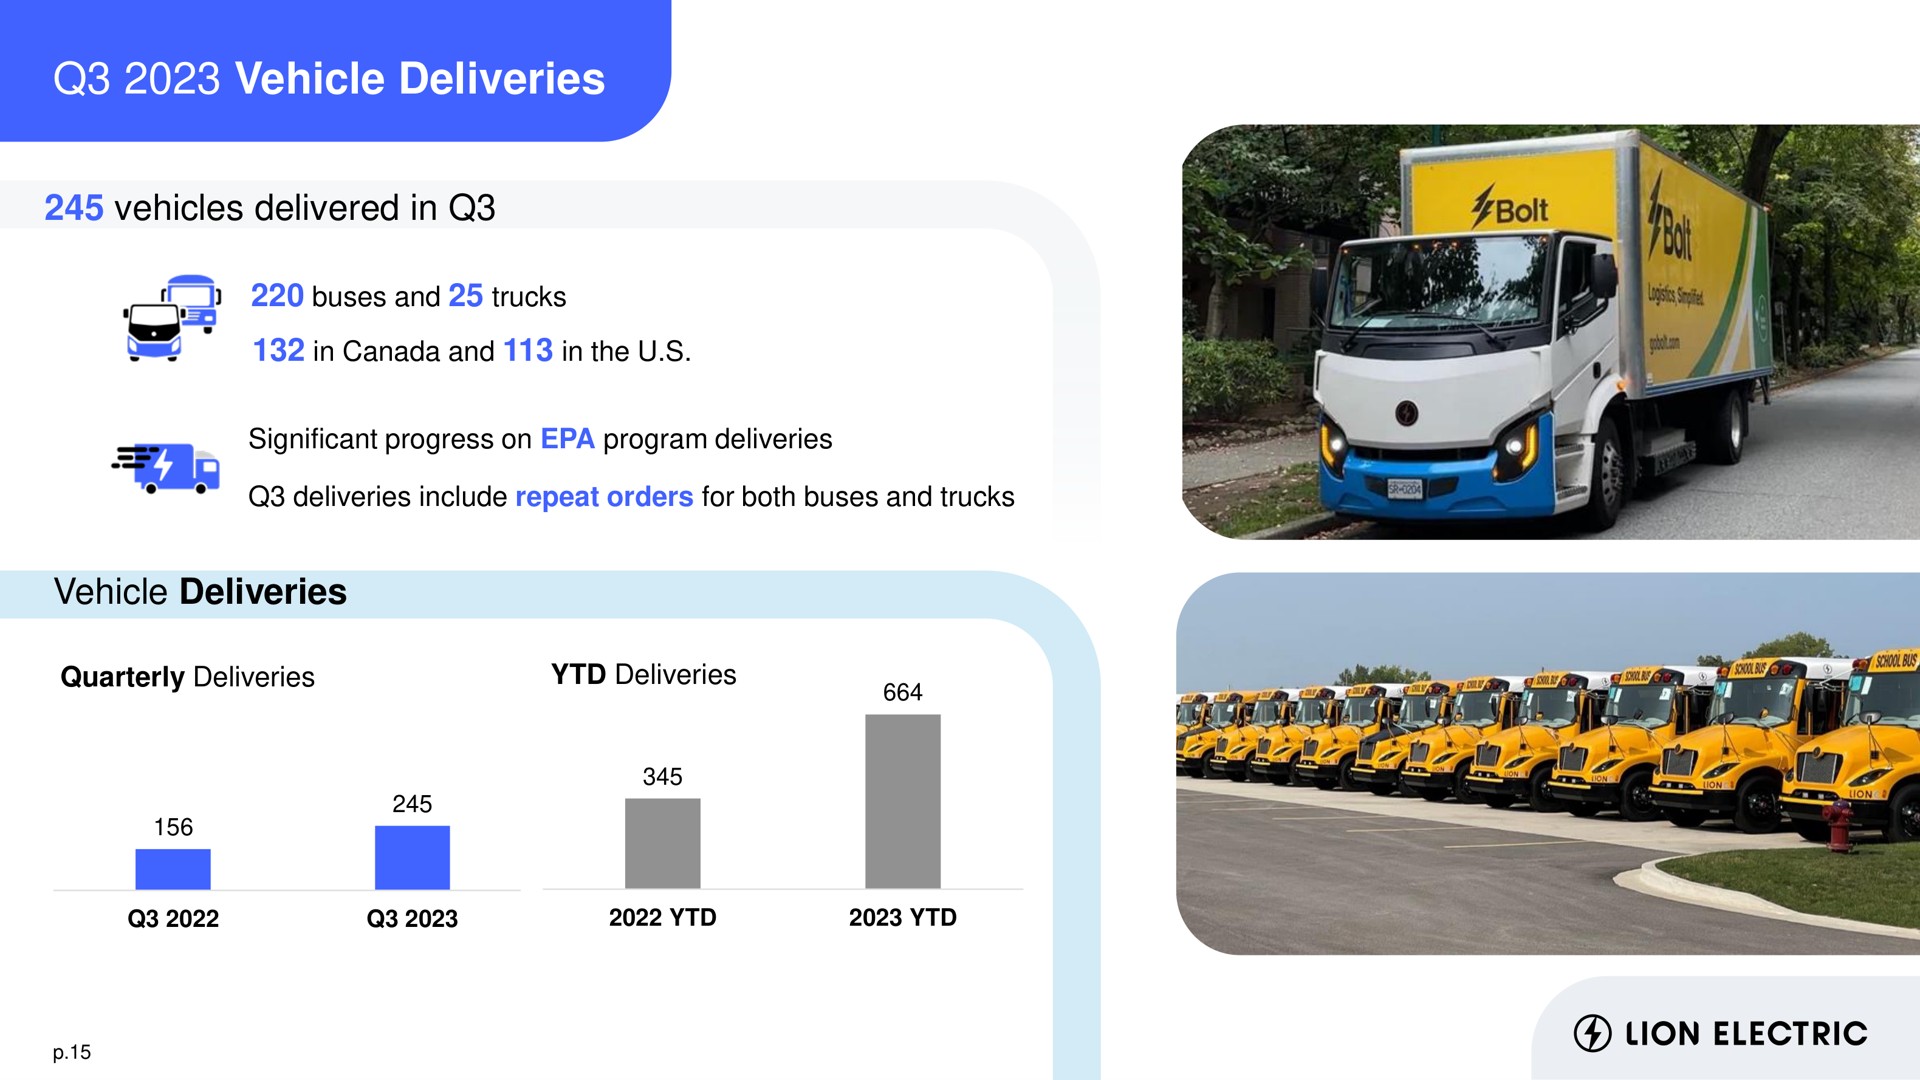 vehicle deliveries vehicles delivered in vehicle deliveries buses and trucks canada and the significant progress on program include repeat orders for both buses and trucks quarterly a lion electric | Lion Electric